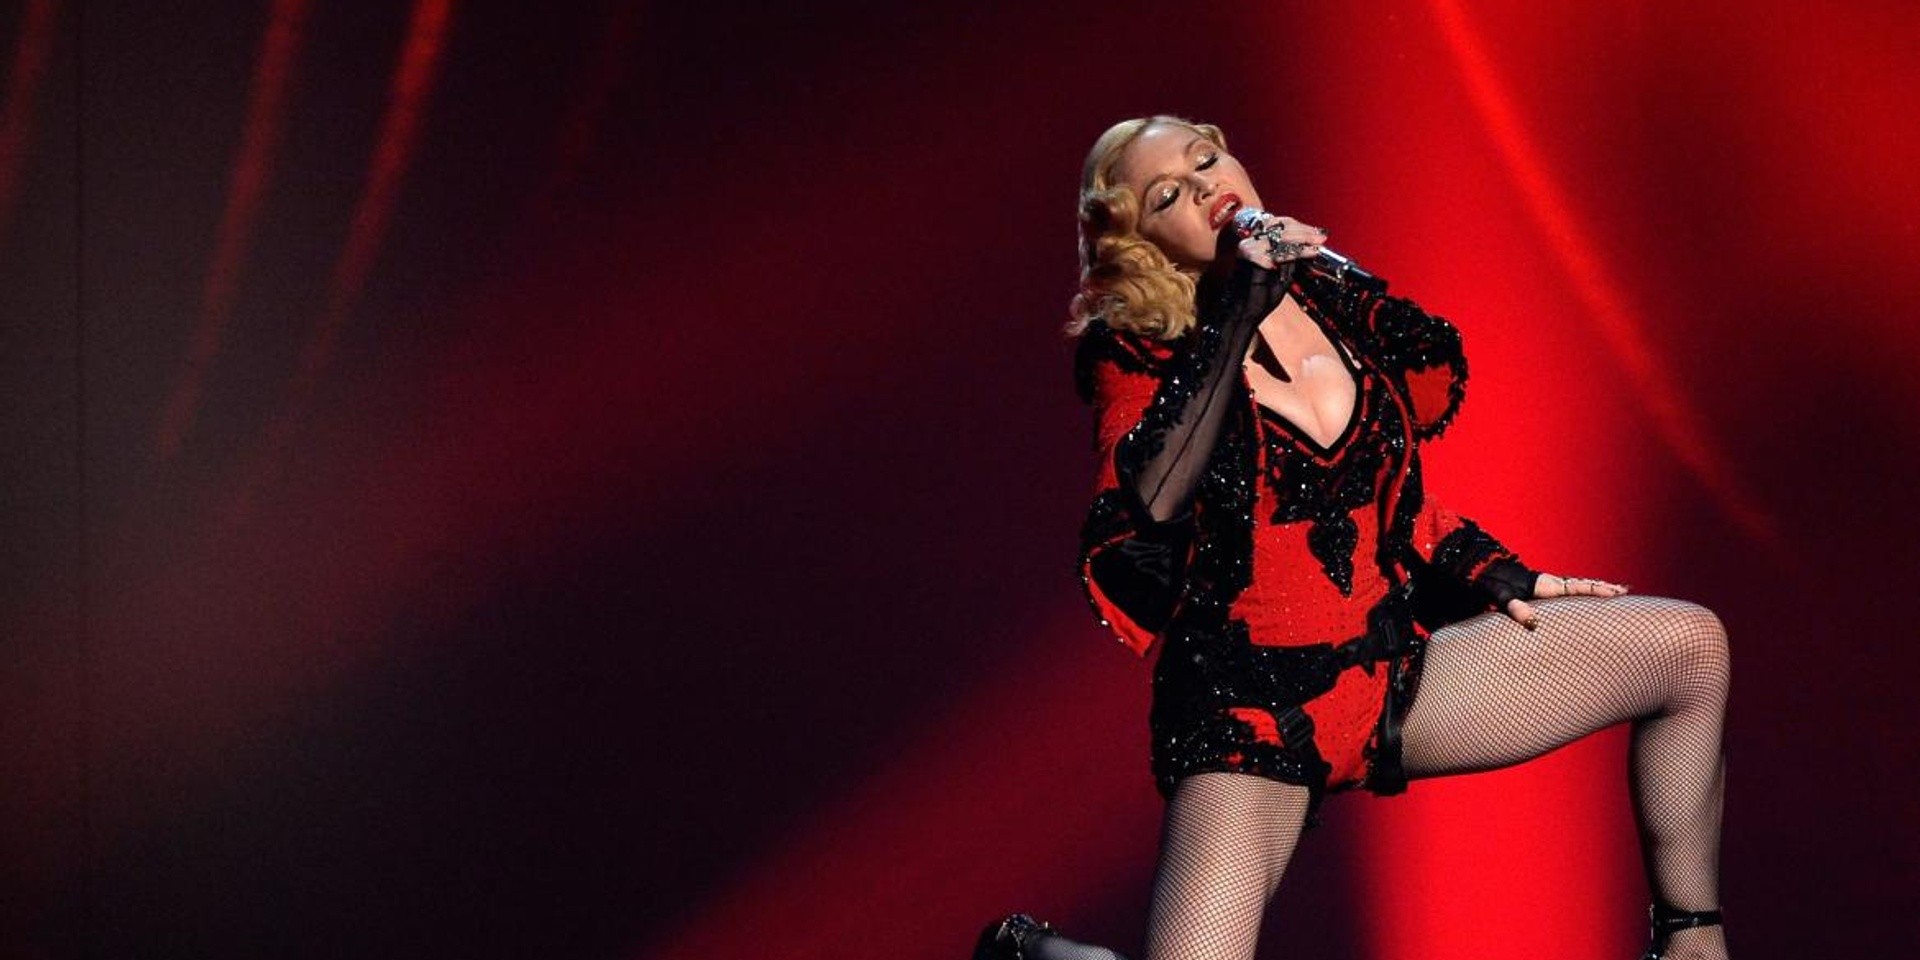 Madonna's first Singapore show rated R18, ticket prices revealed